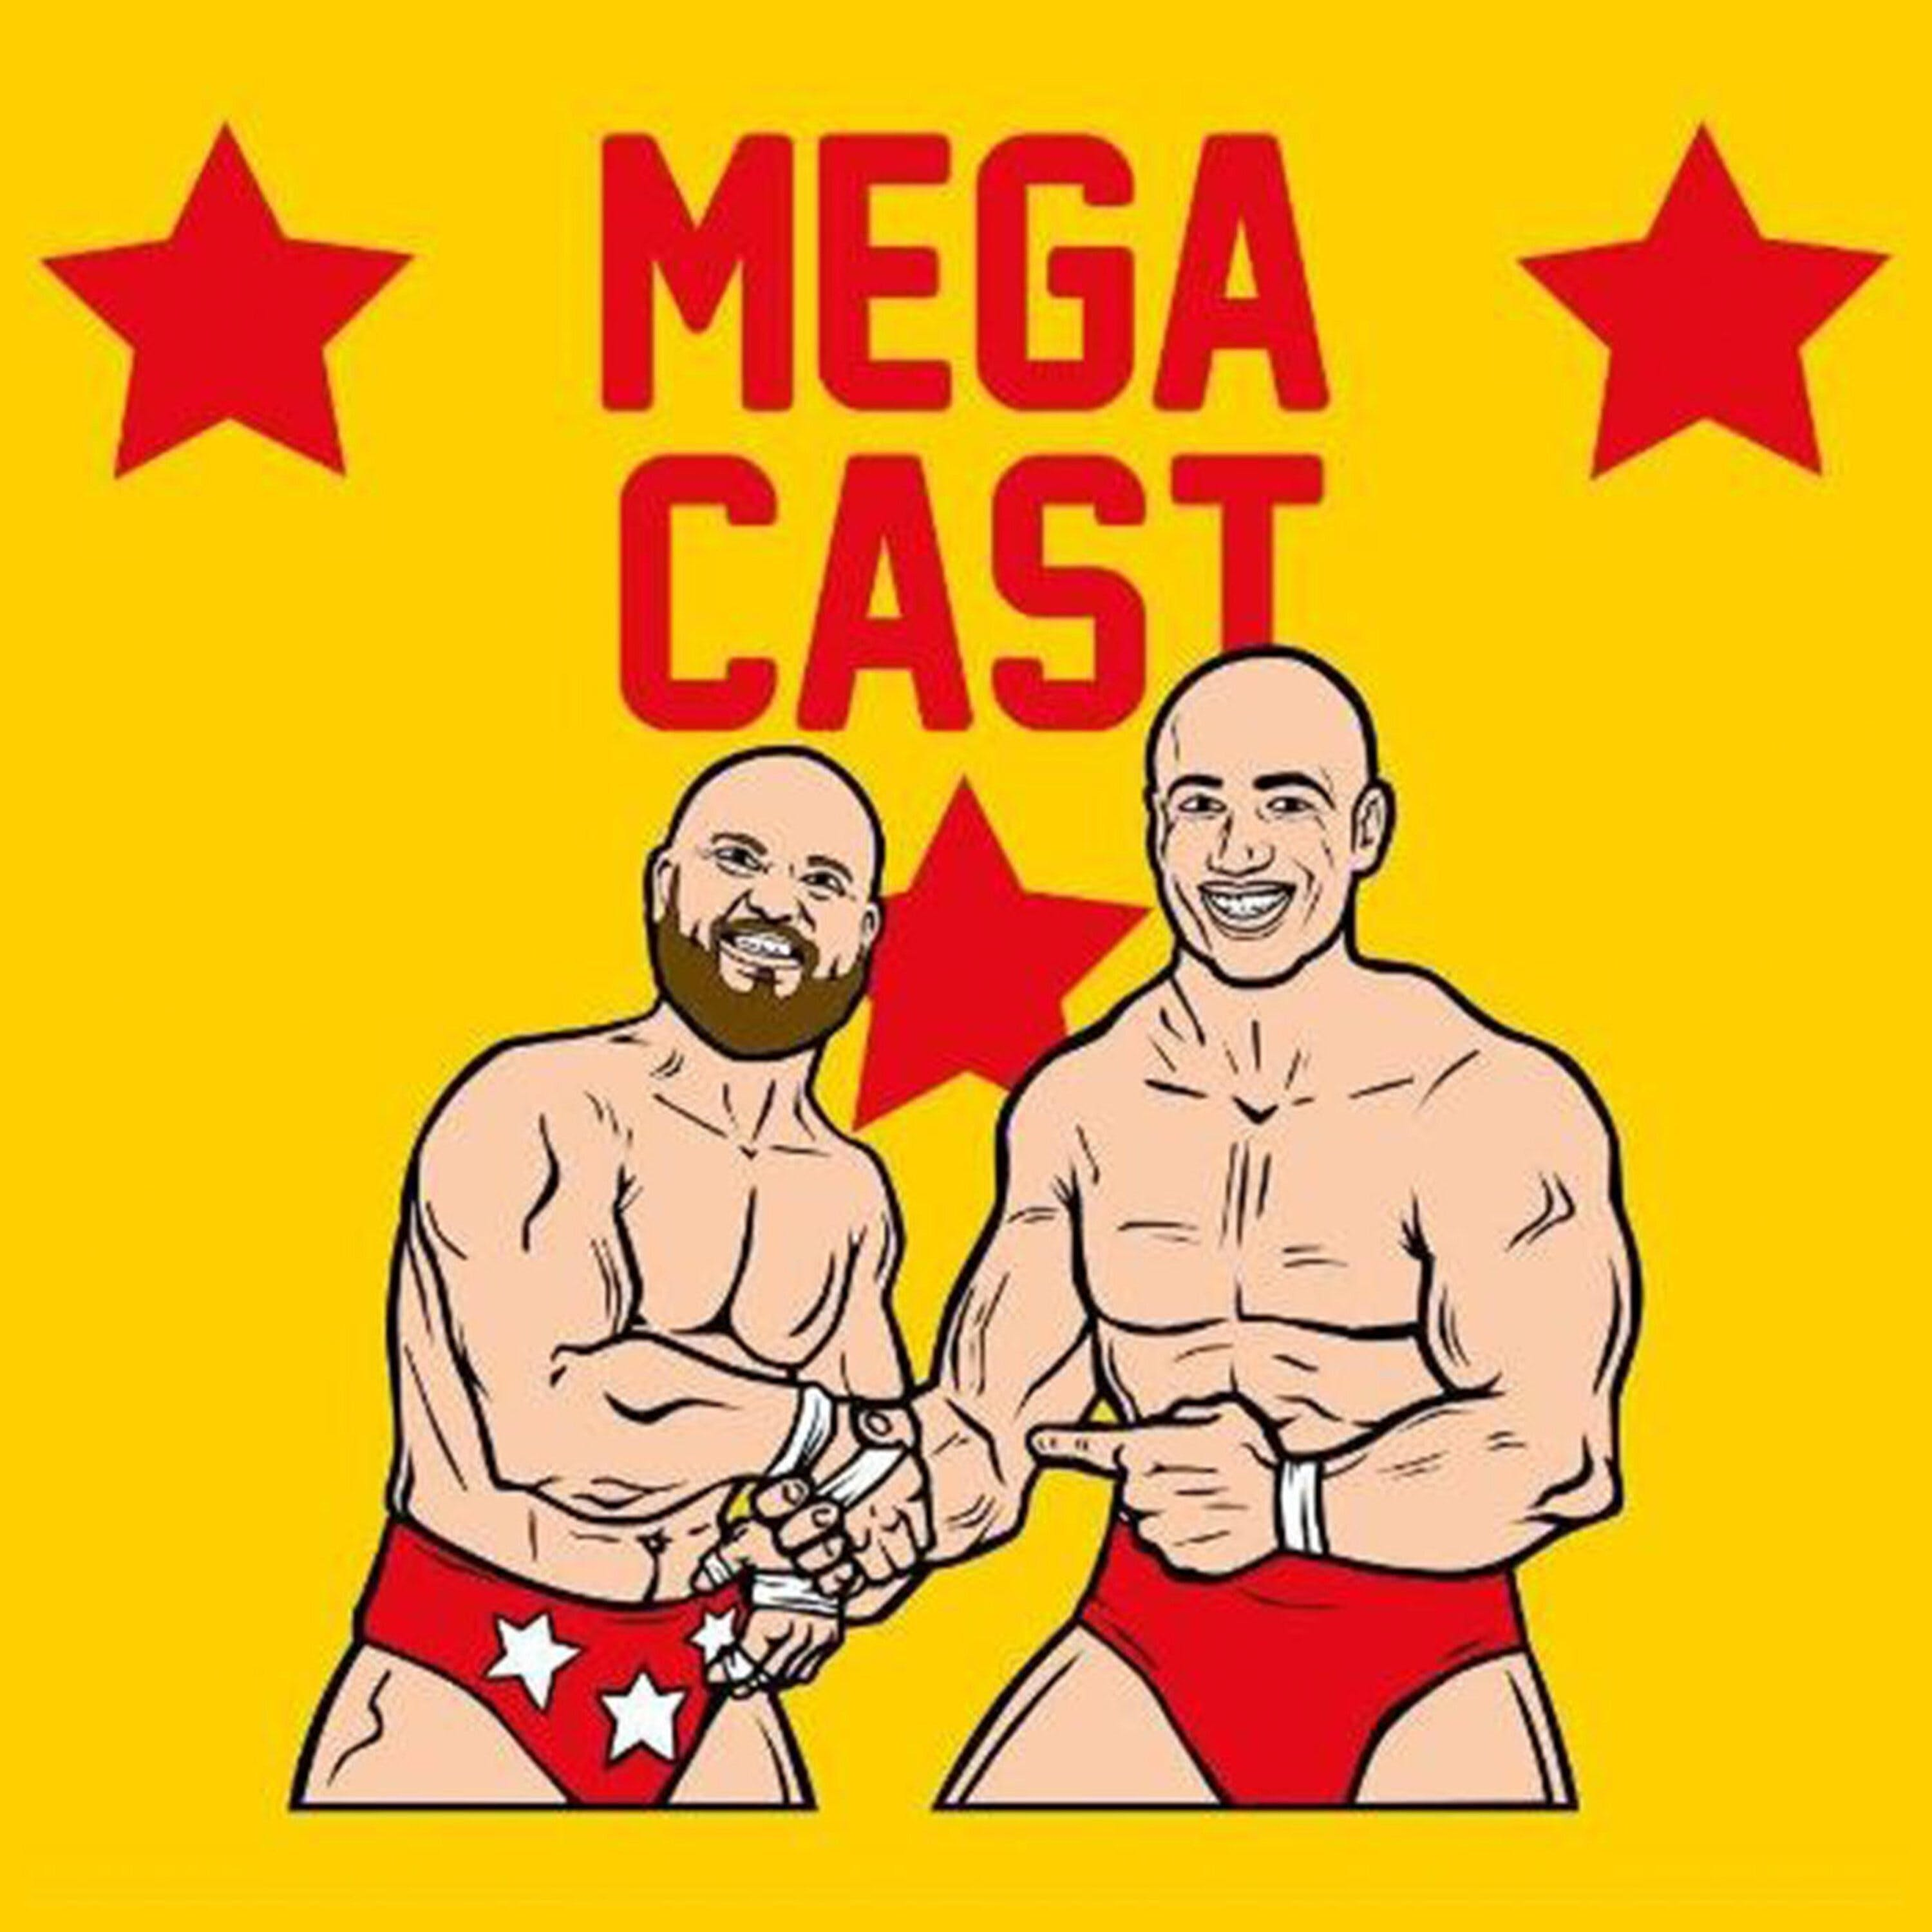 MegaCast 11/13/19 "Do What To A Tiger?"